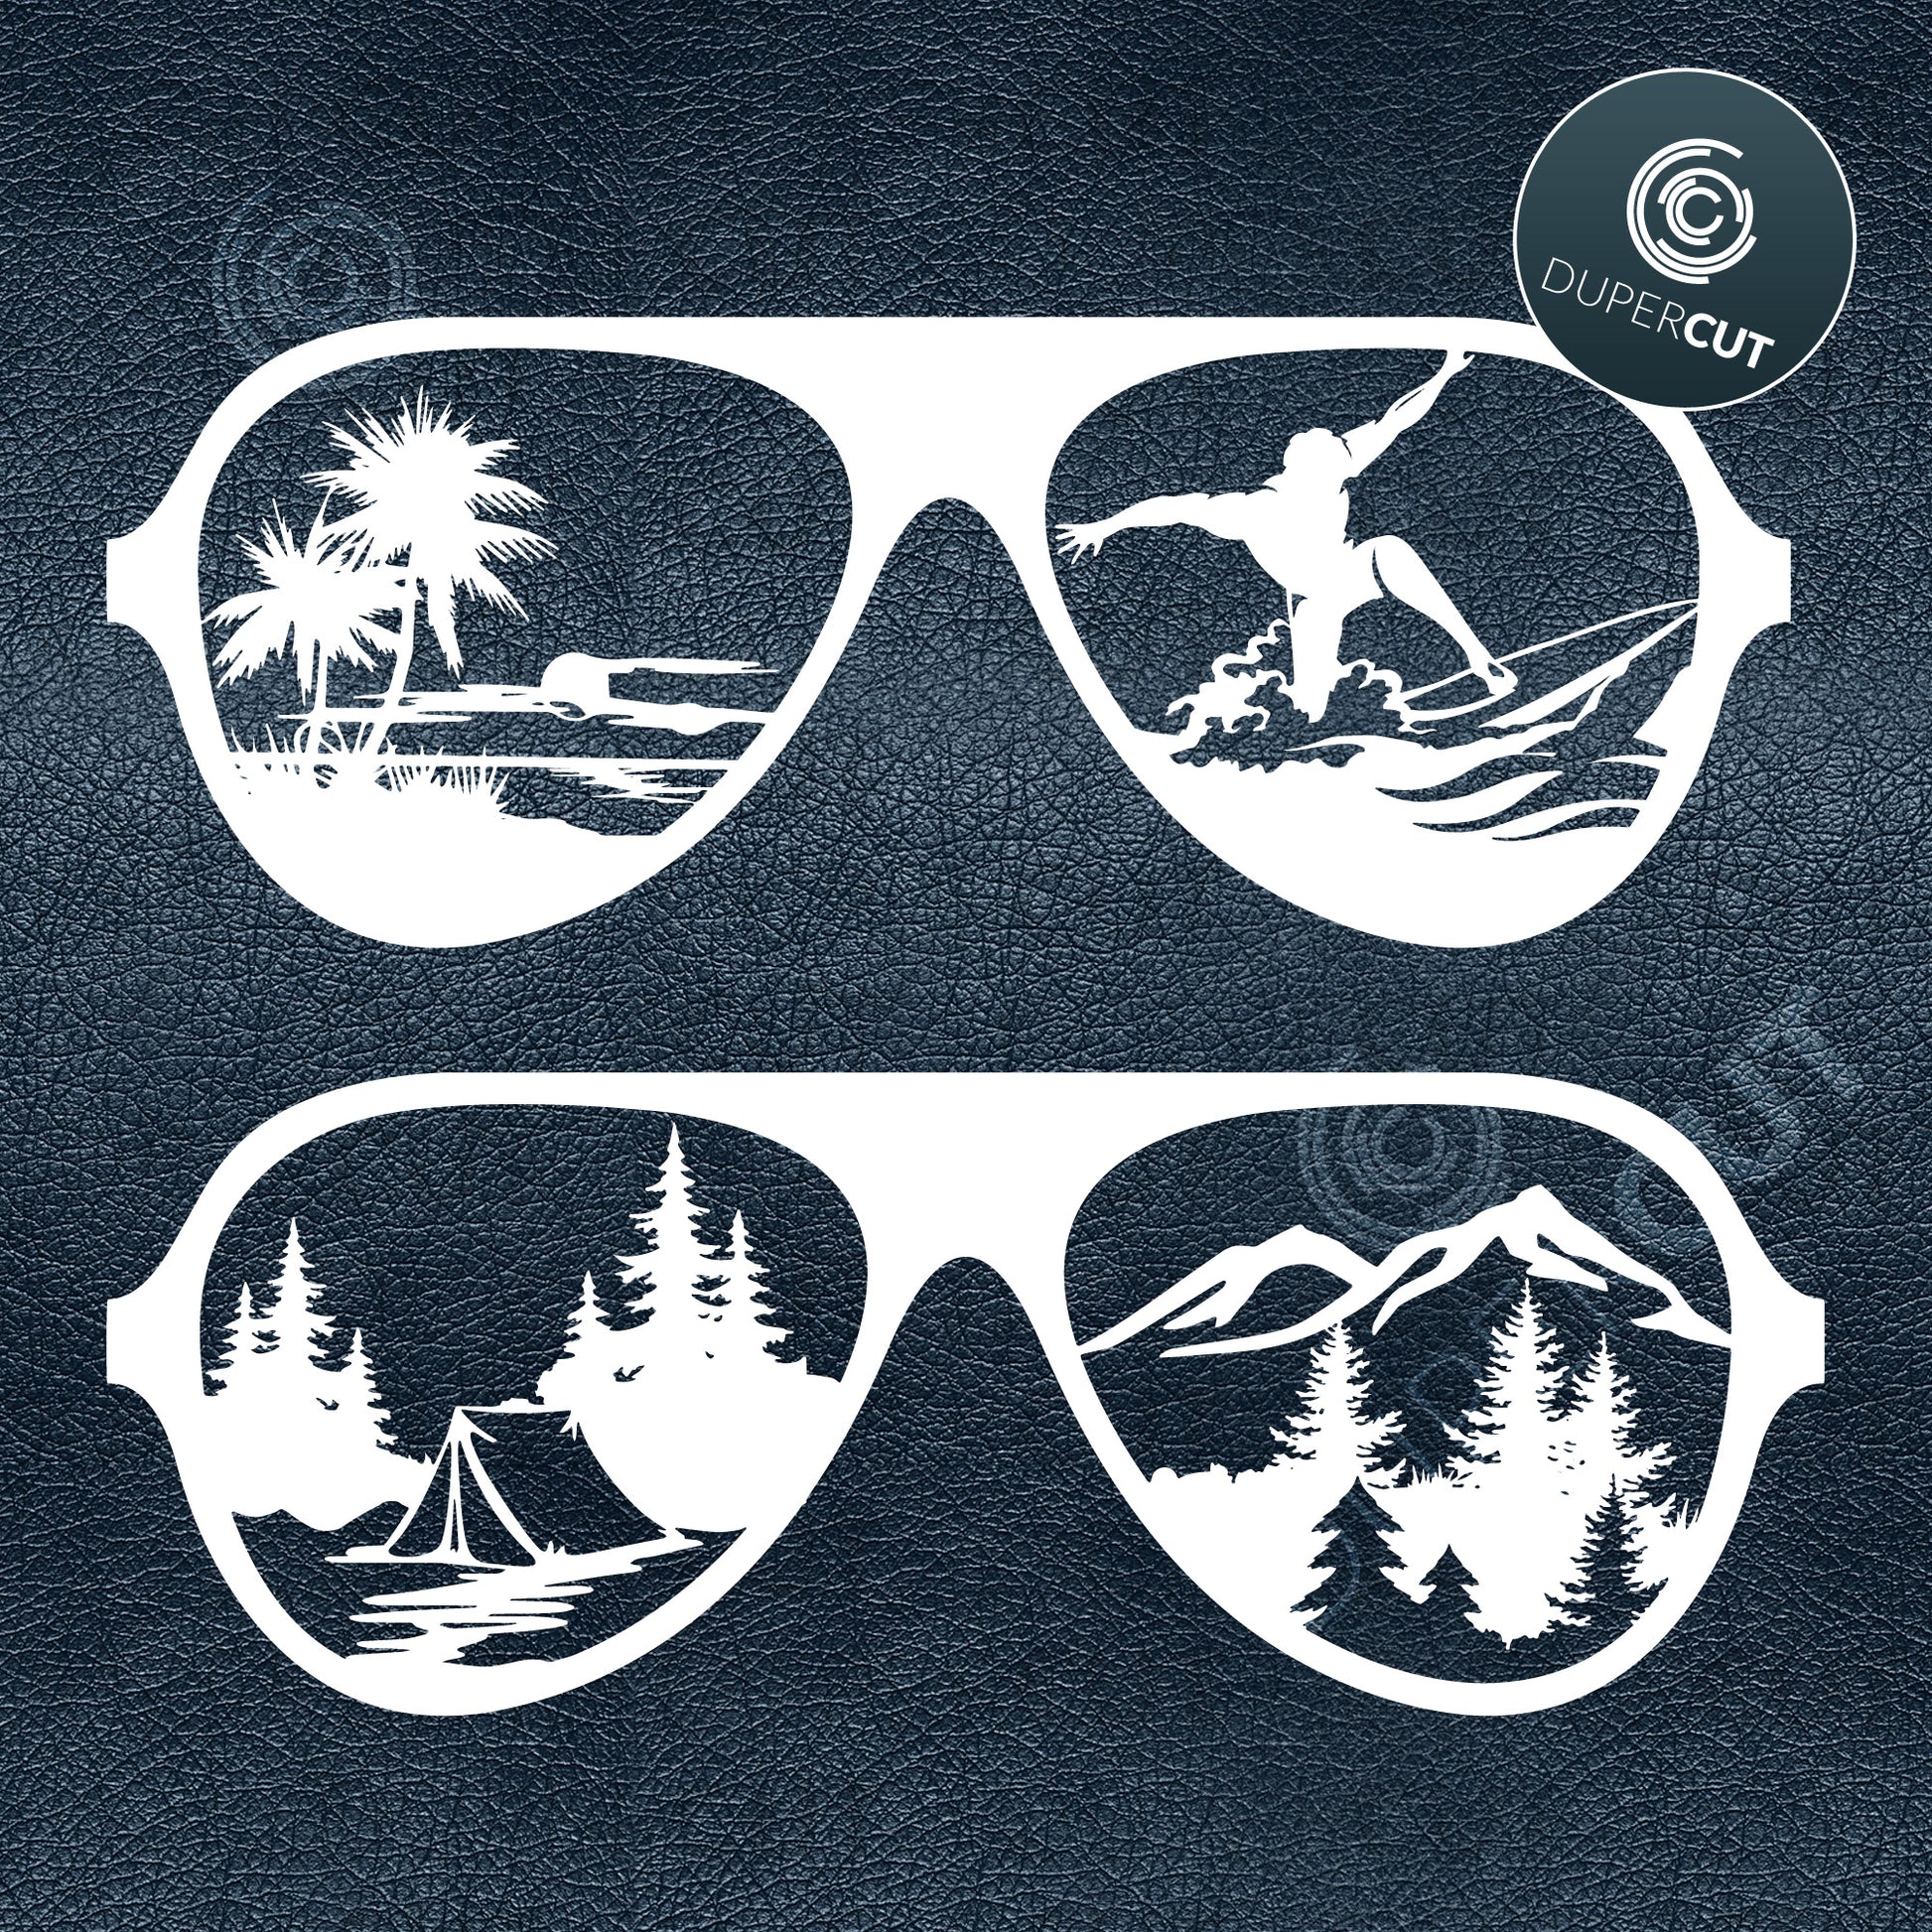 Sunglasses silhouette, outdoor adventure template  - SVG DXF JPEG files for CNC machines, laser cutting, Cricut, Silhouette Cameo, Glowforge engraving